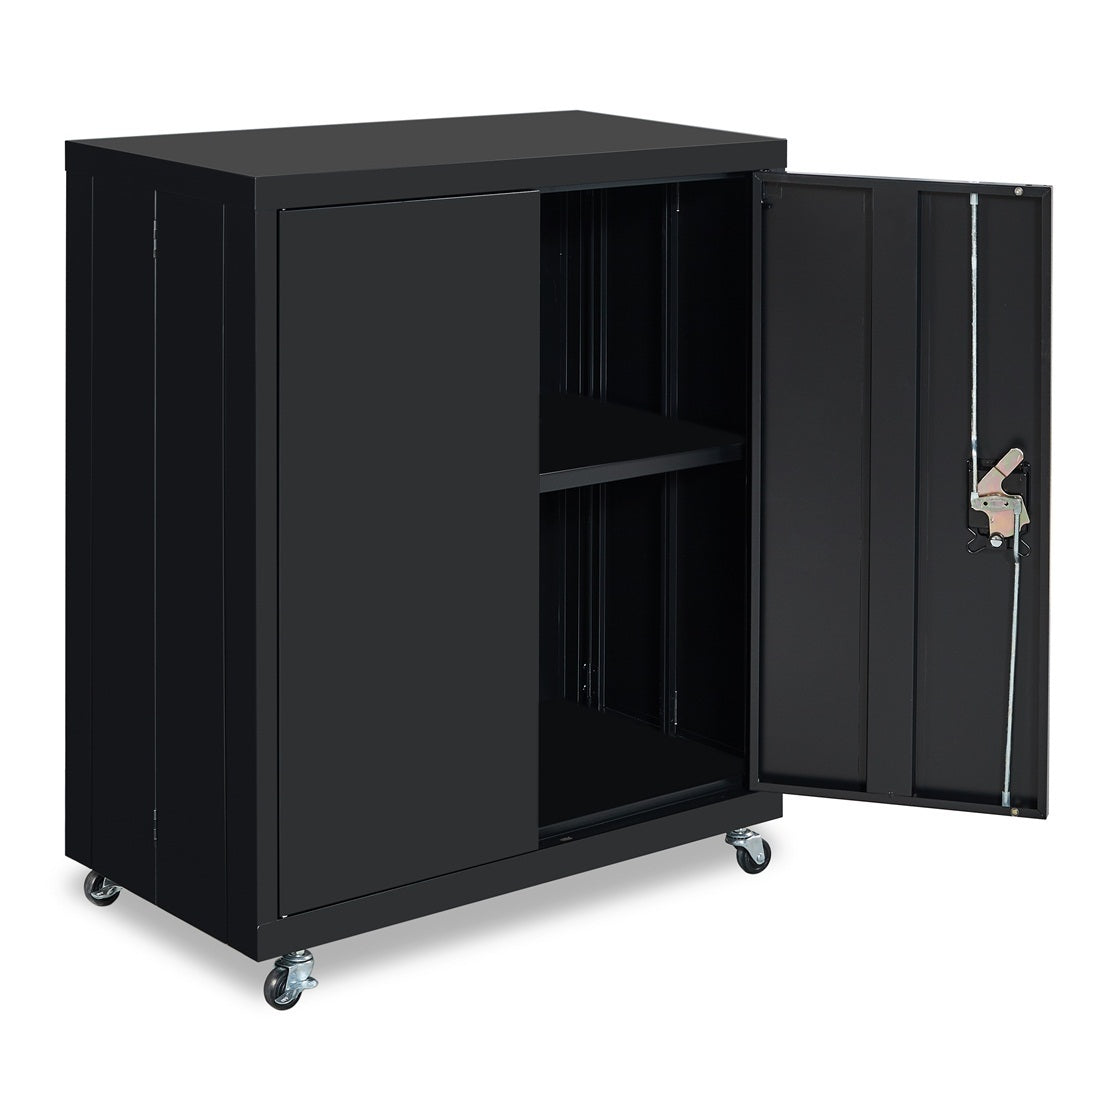 1-Shelf Metal Filing Cabinet with Lock for Home and Office Storage